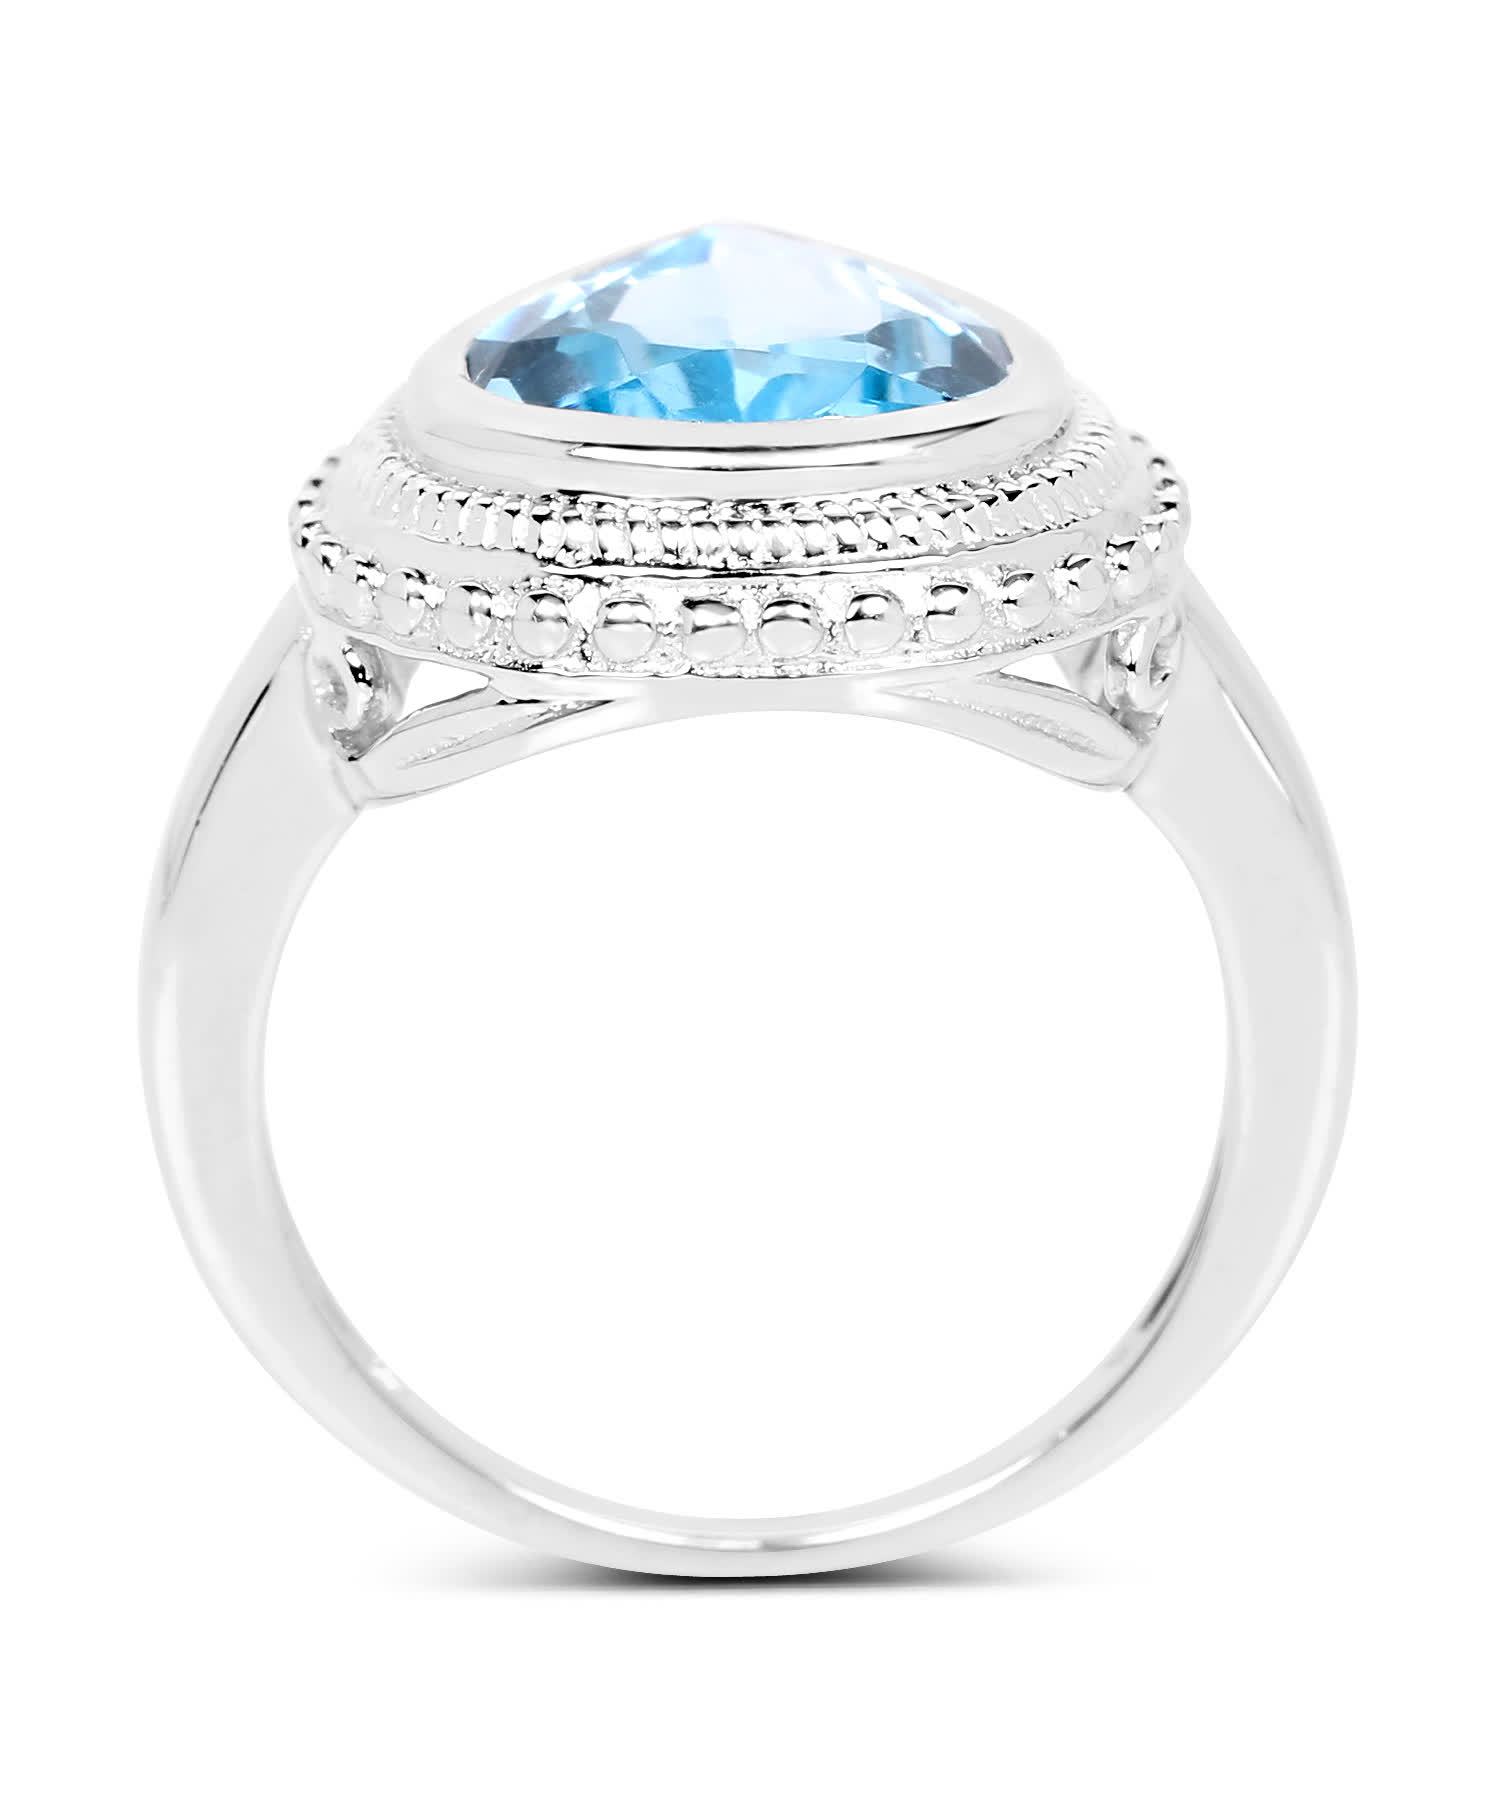 5.30ctw Natural Sky Blue Topaz Rhodium Plated 925 Sterling Silver Cocktail Ring View 2